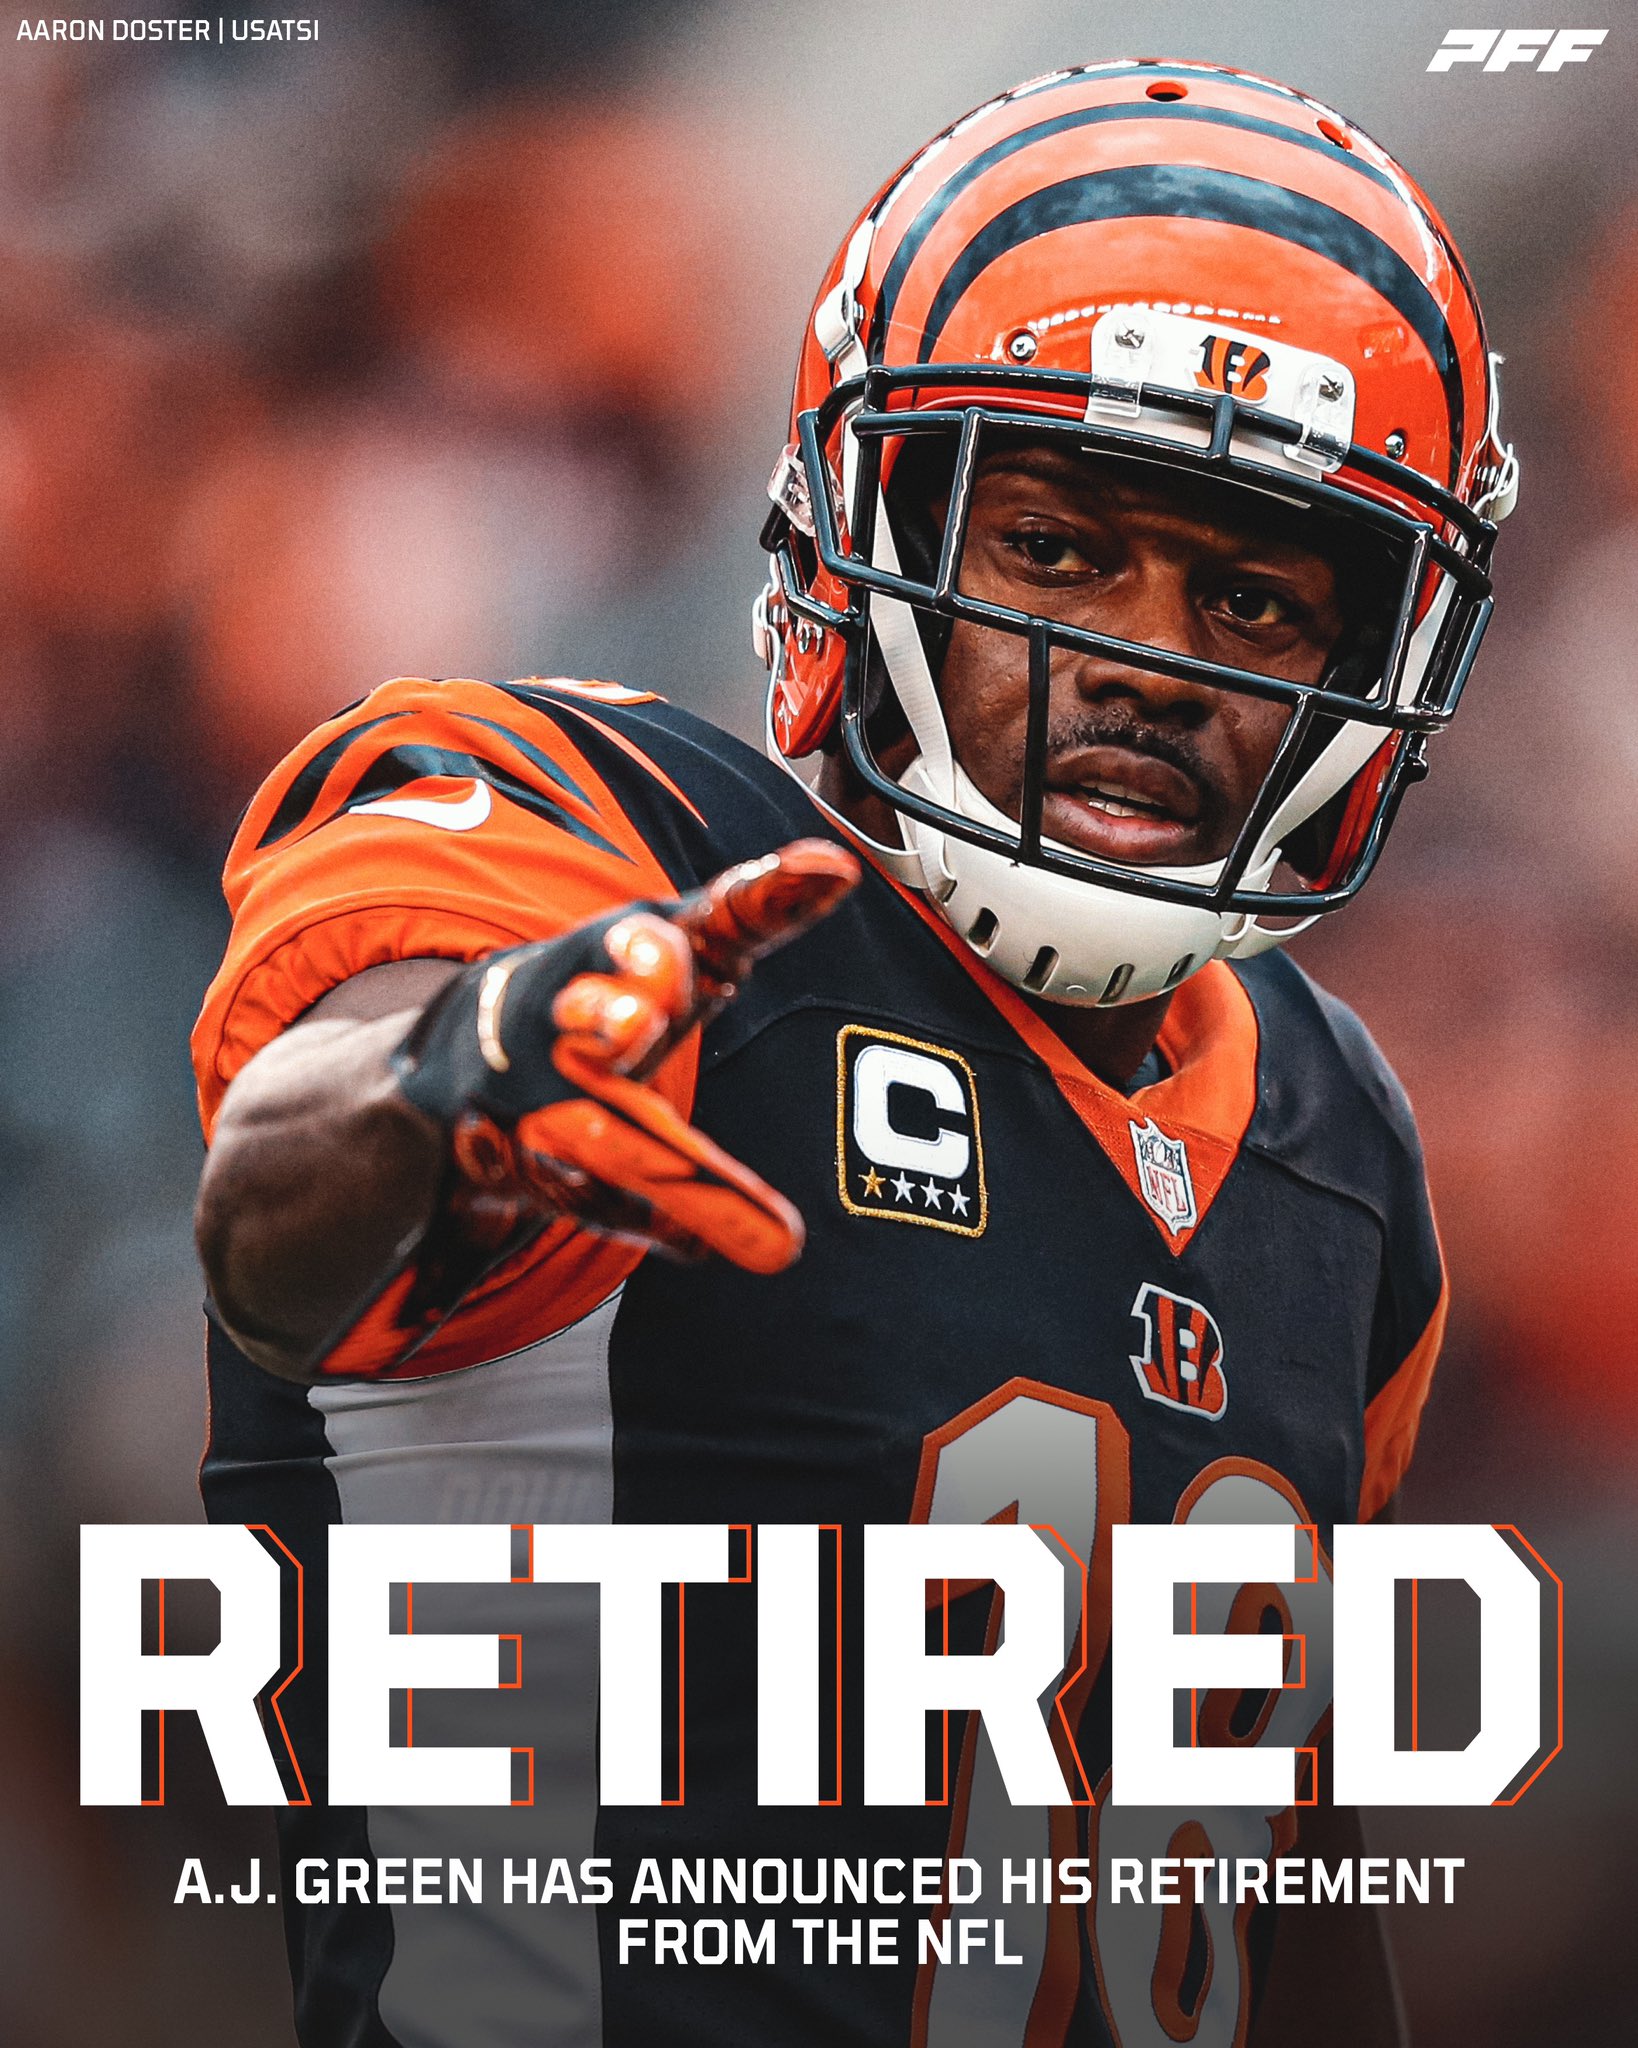 PFF on Twitter: "A.J. Green has his retirement his IG https://t.co/6HMhgMWxS5" /